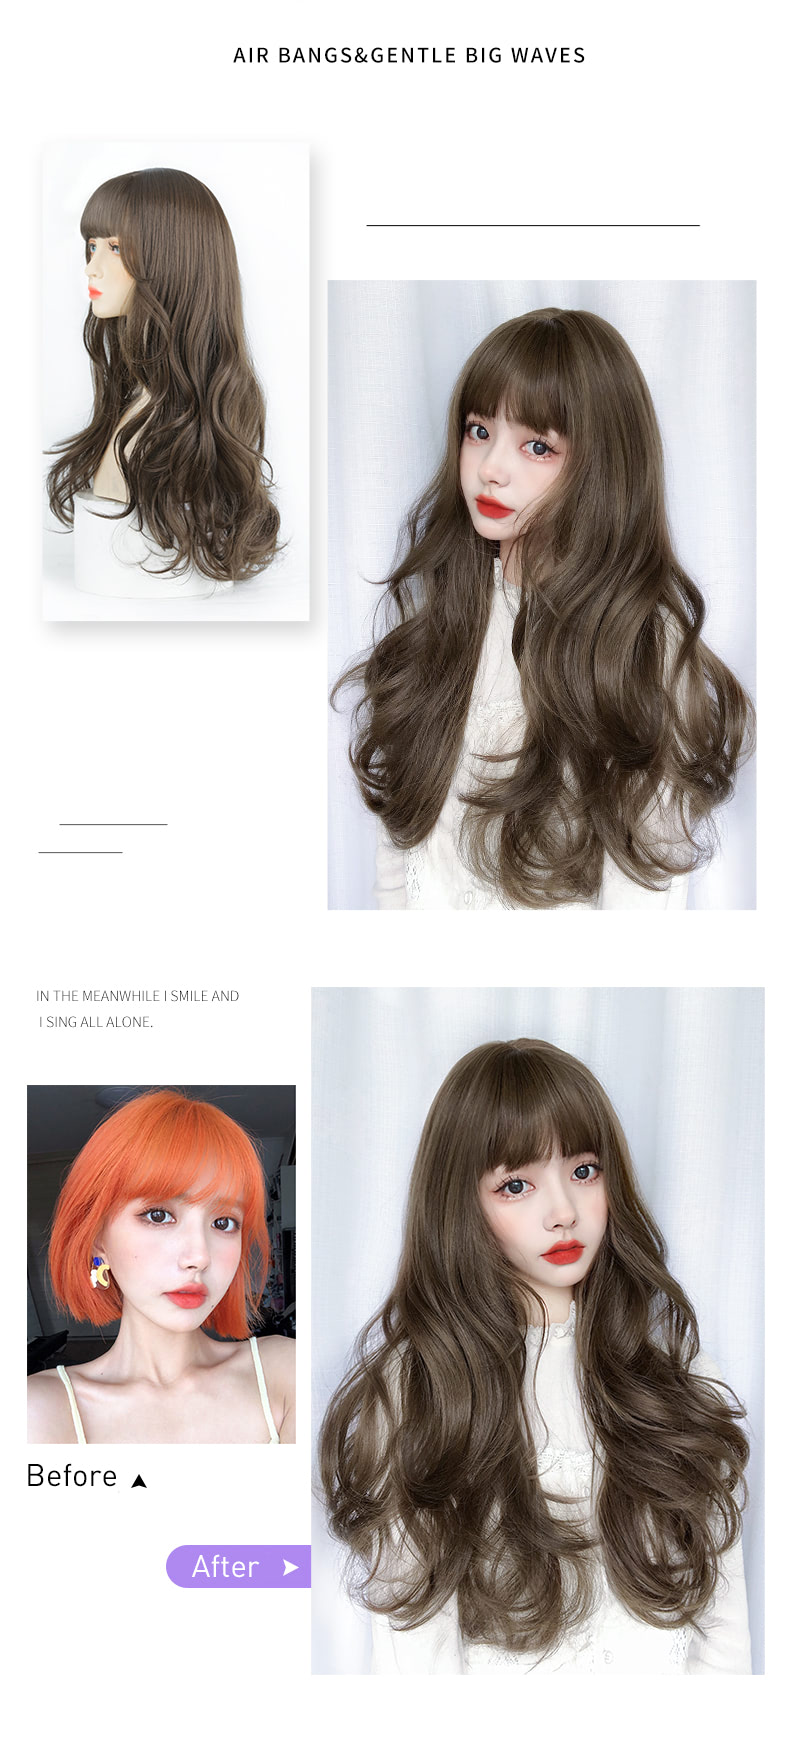 Sweet Female Synthetic Long Wig with Air Bangs for Daily Party Wear07